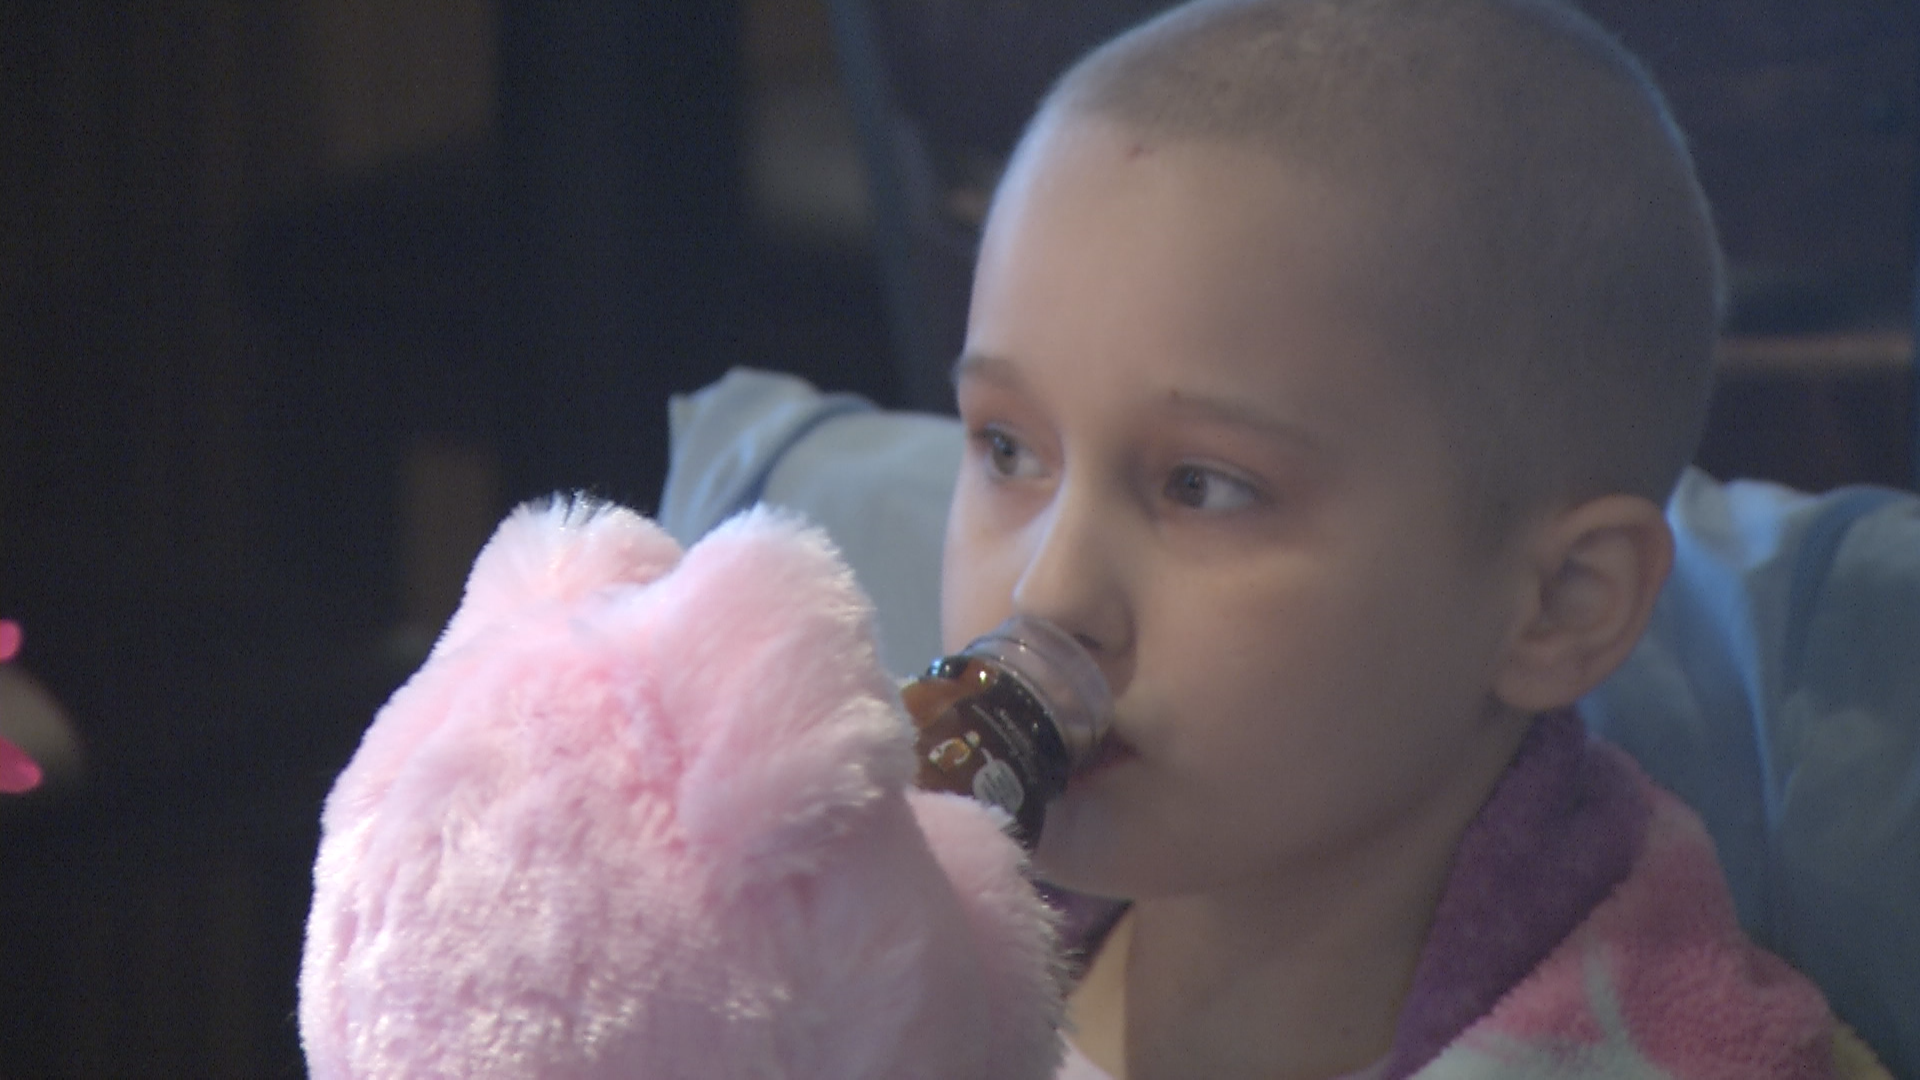 Lizzy has inspired countless people while she's been battling cancer for nearly half her life.